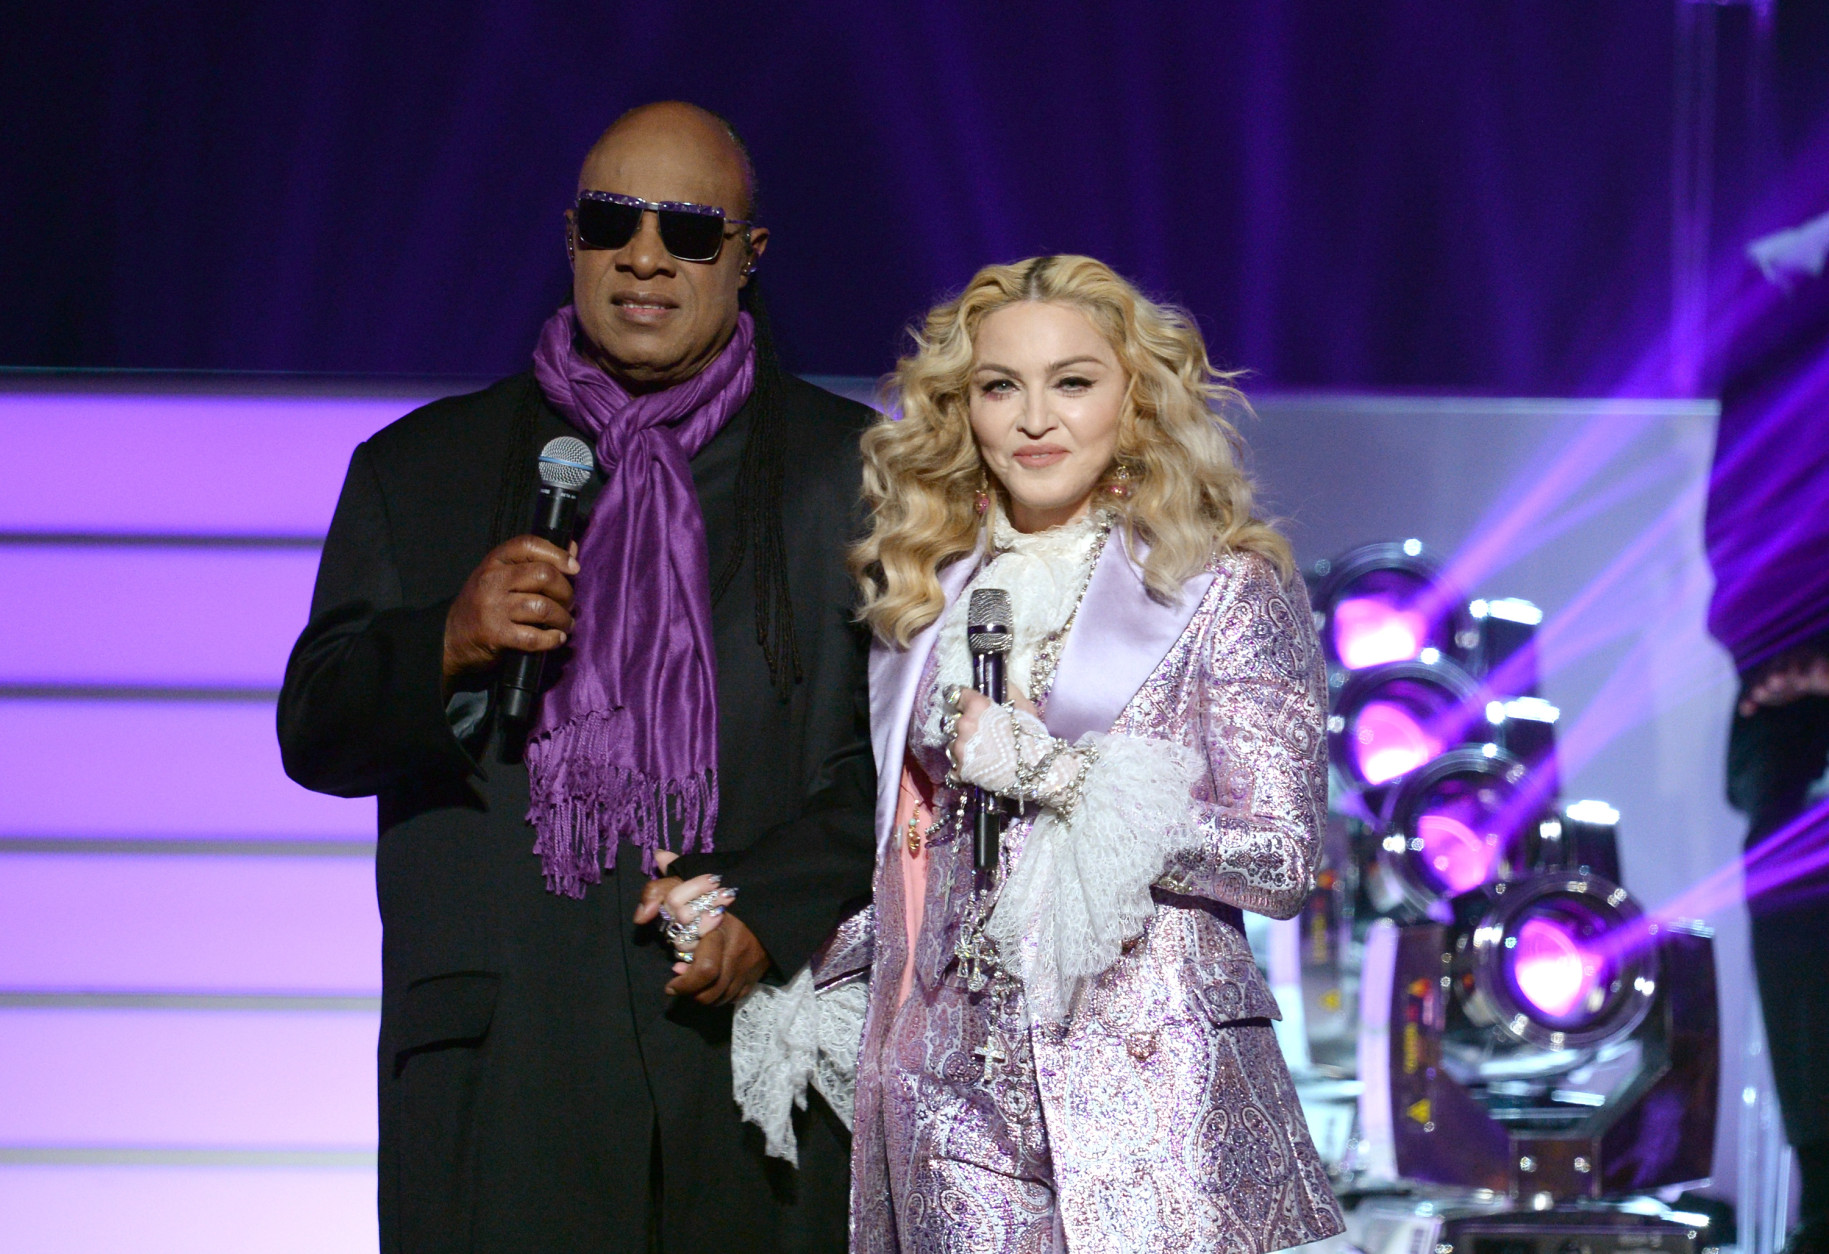 LAS VEGAS, NV - MAY 22: Recording artists Stevie Wonder (L) and Madonna perform a tribute to Prince onstage during the 2016 Billboard Music Awards at T-Mobile Arena on May 22, 2016 in Las Vegas, Nevada.  (Photo by Kevin Winter/Getty Images)